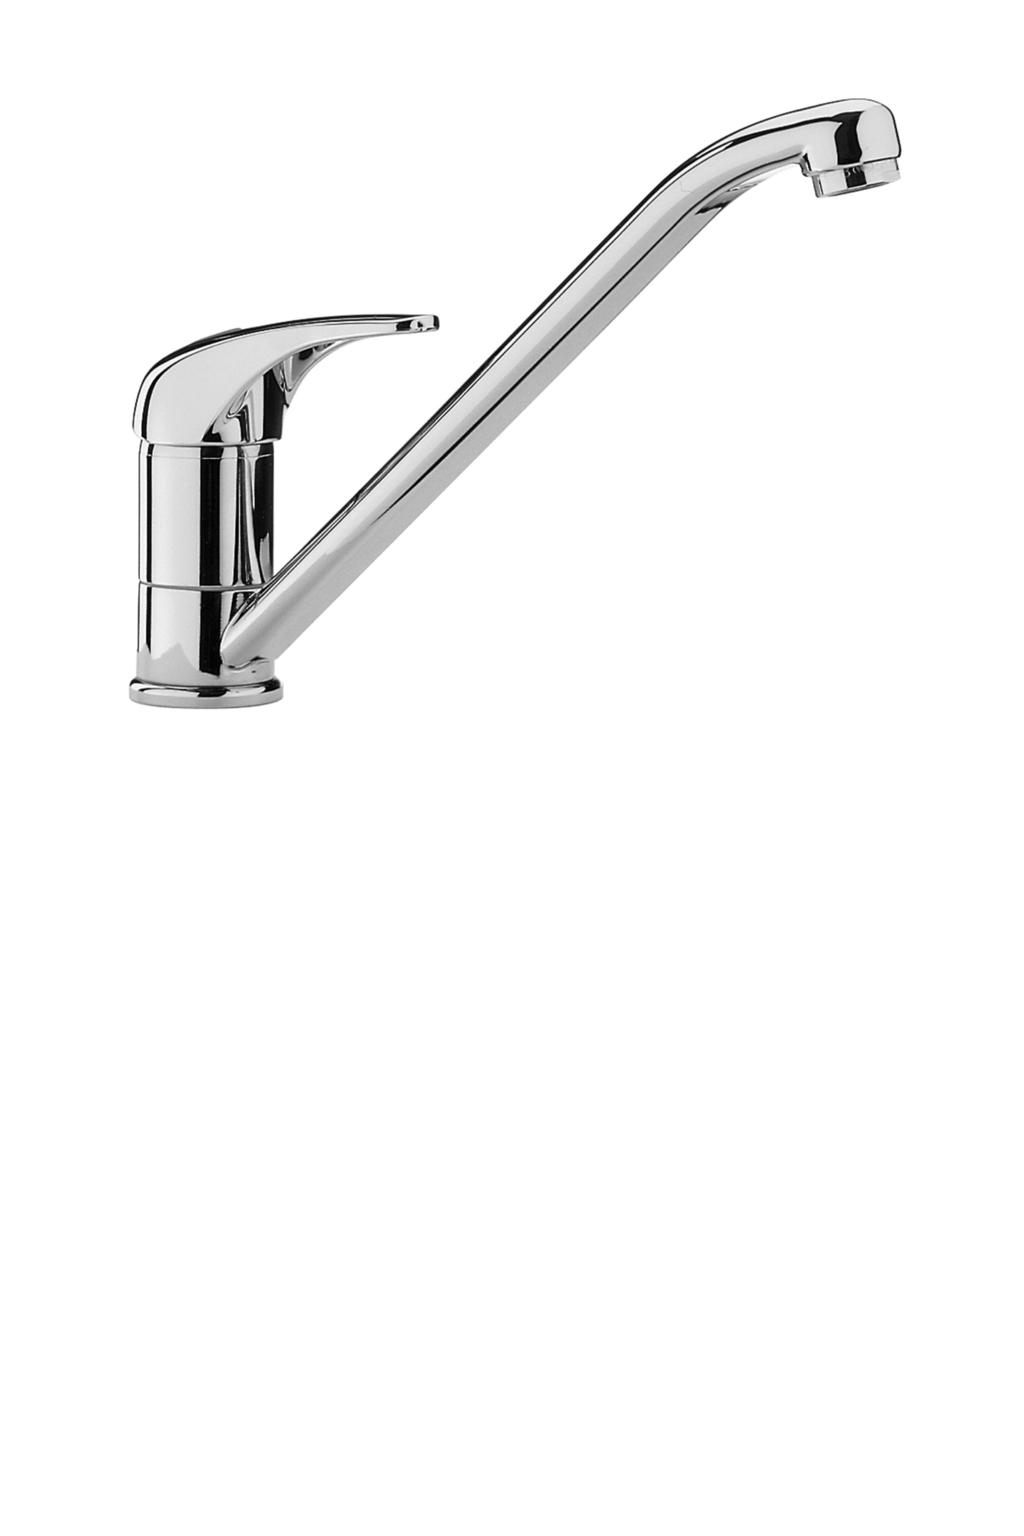 350mm 123,90 185 Miscelatore lavello monoforo completo di: aeratore M22x1F set 2 flessibili inox 3/8 G One-hole sink mixer complete with: aerator M22x1F set of 2 stainless steel hoses 3/8 G APM 180.